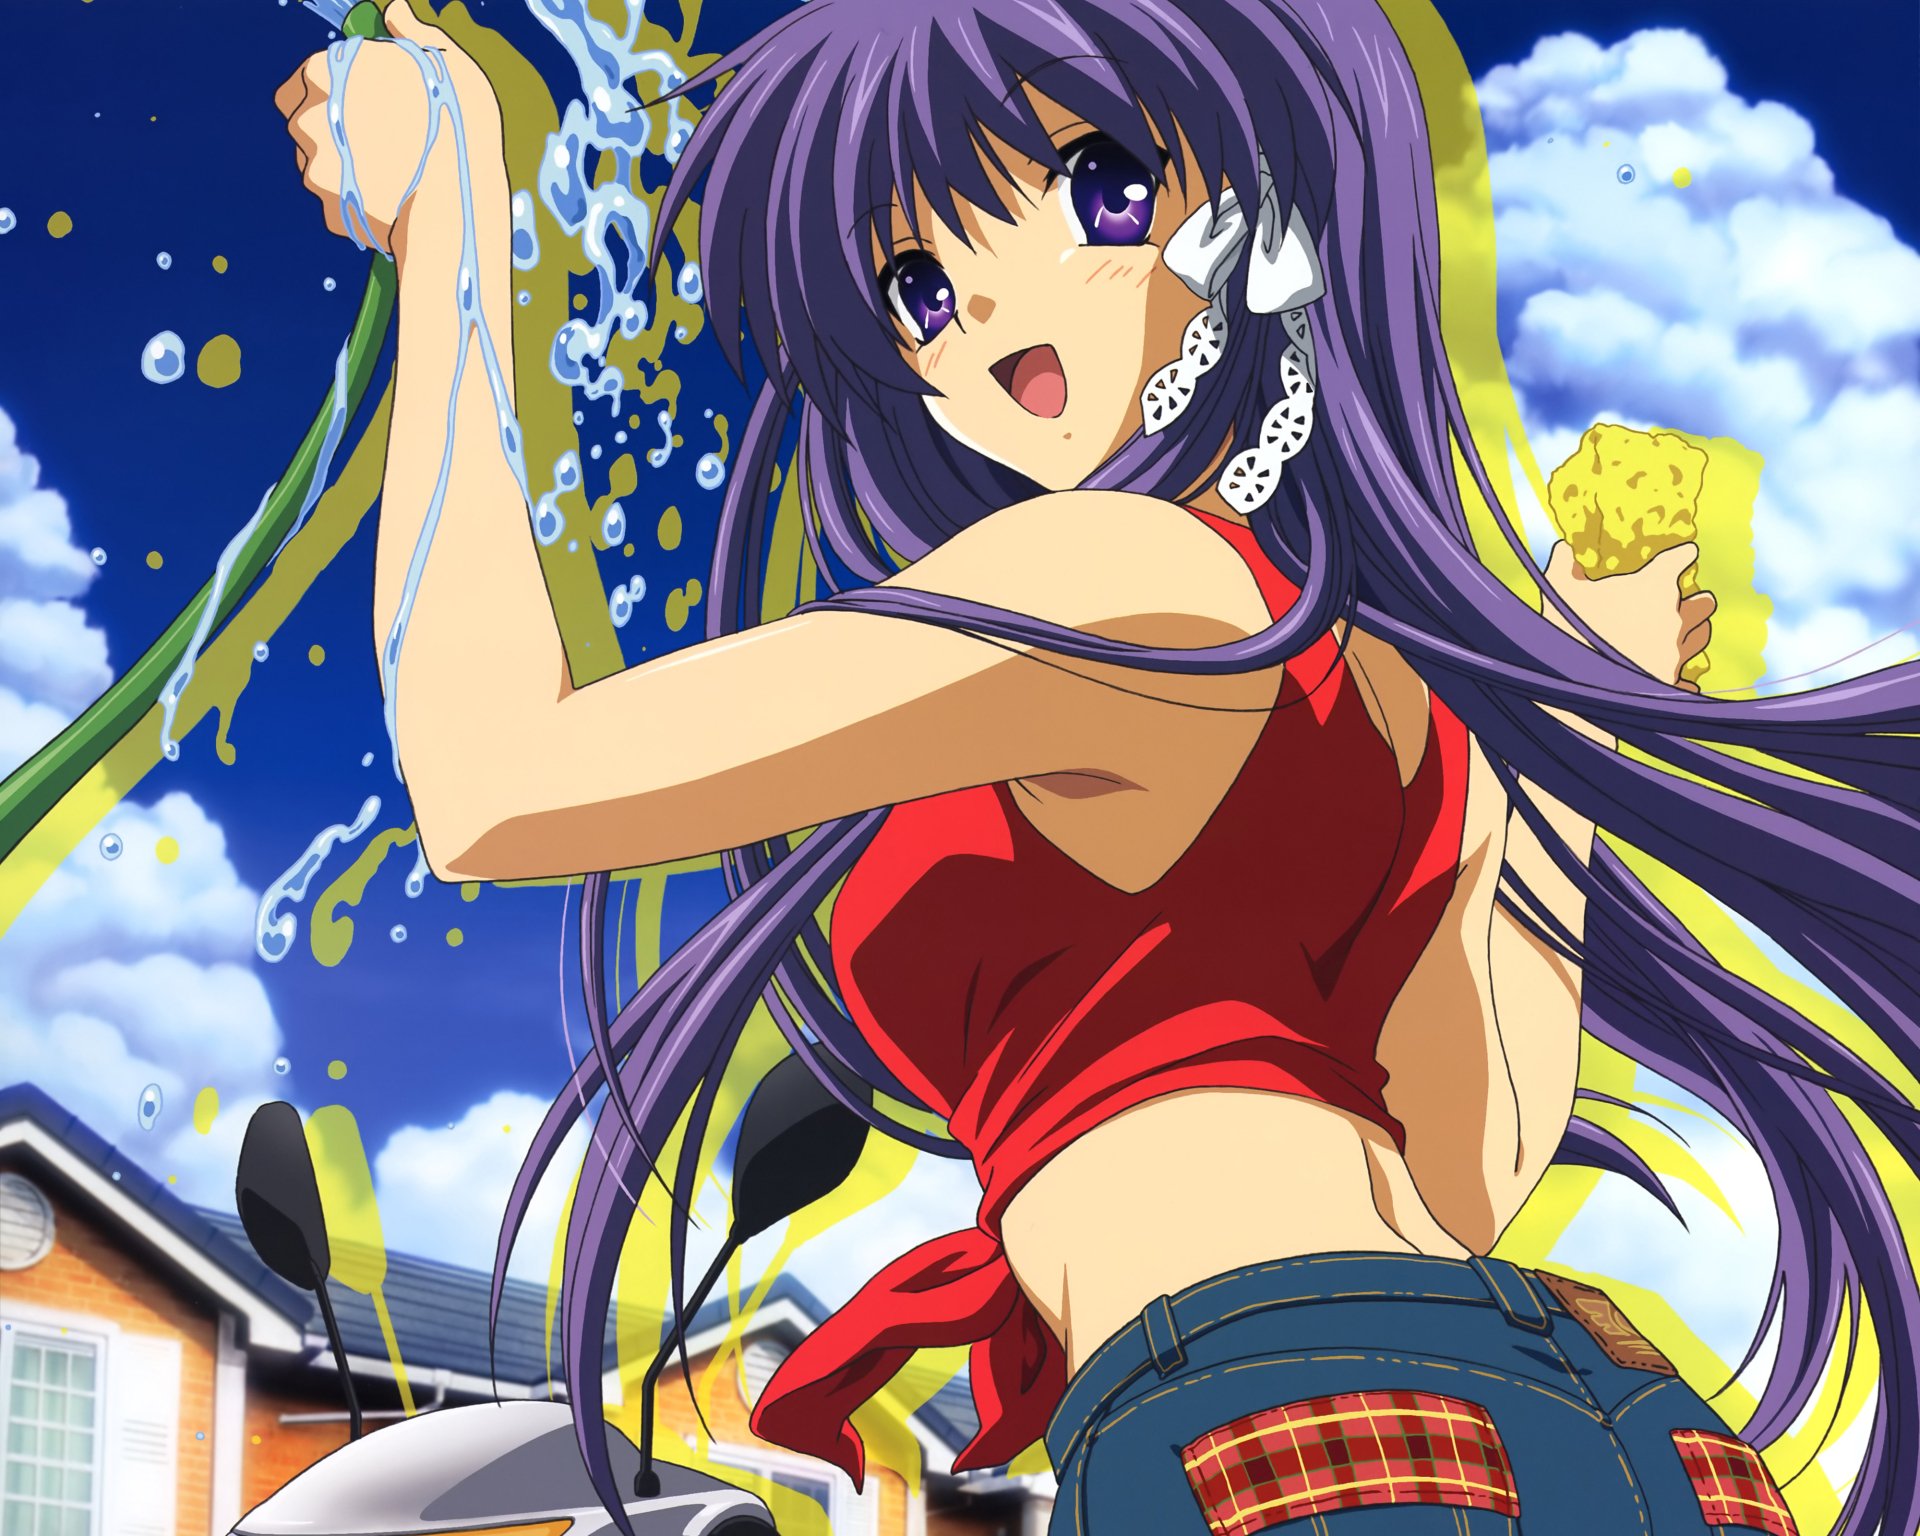 Tomoyo clannad Picture #114121969